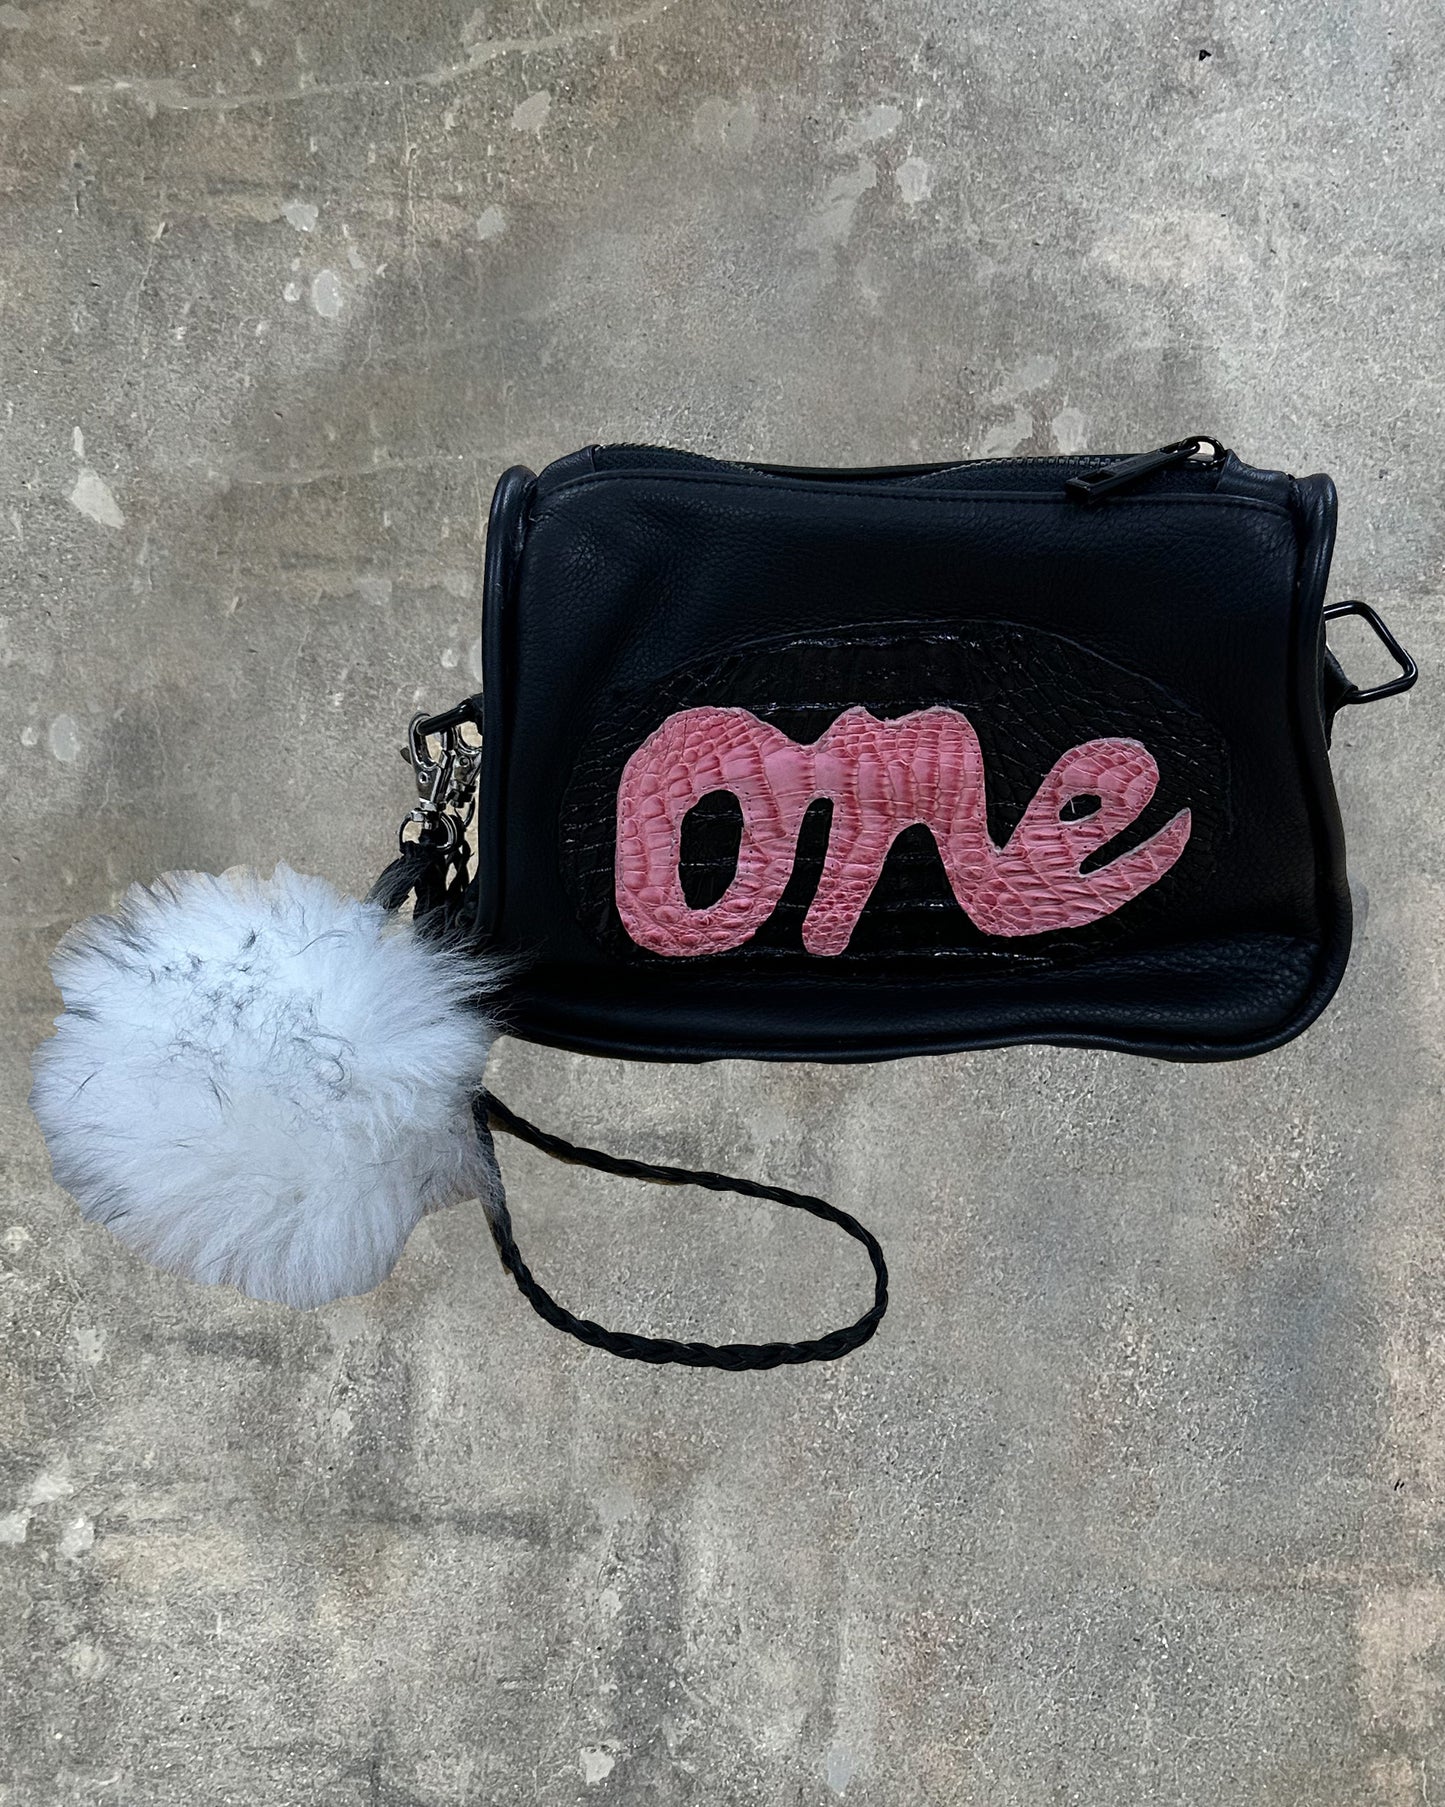 "One" Cow Leather Bag